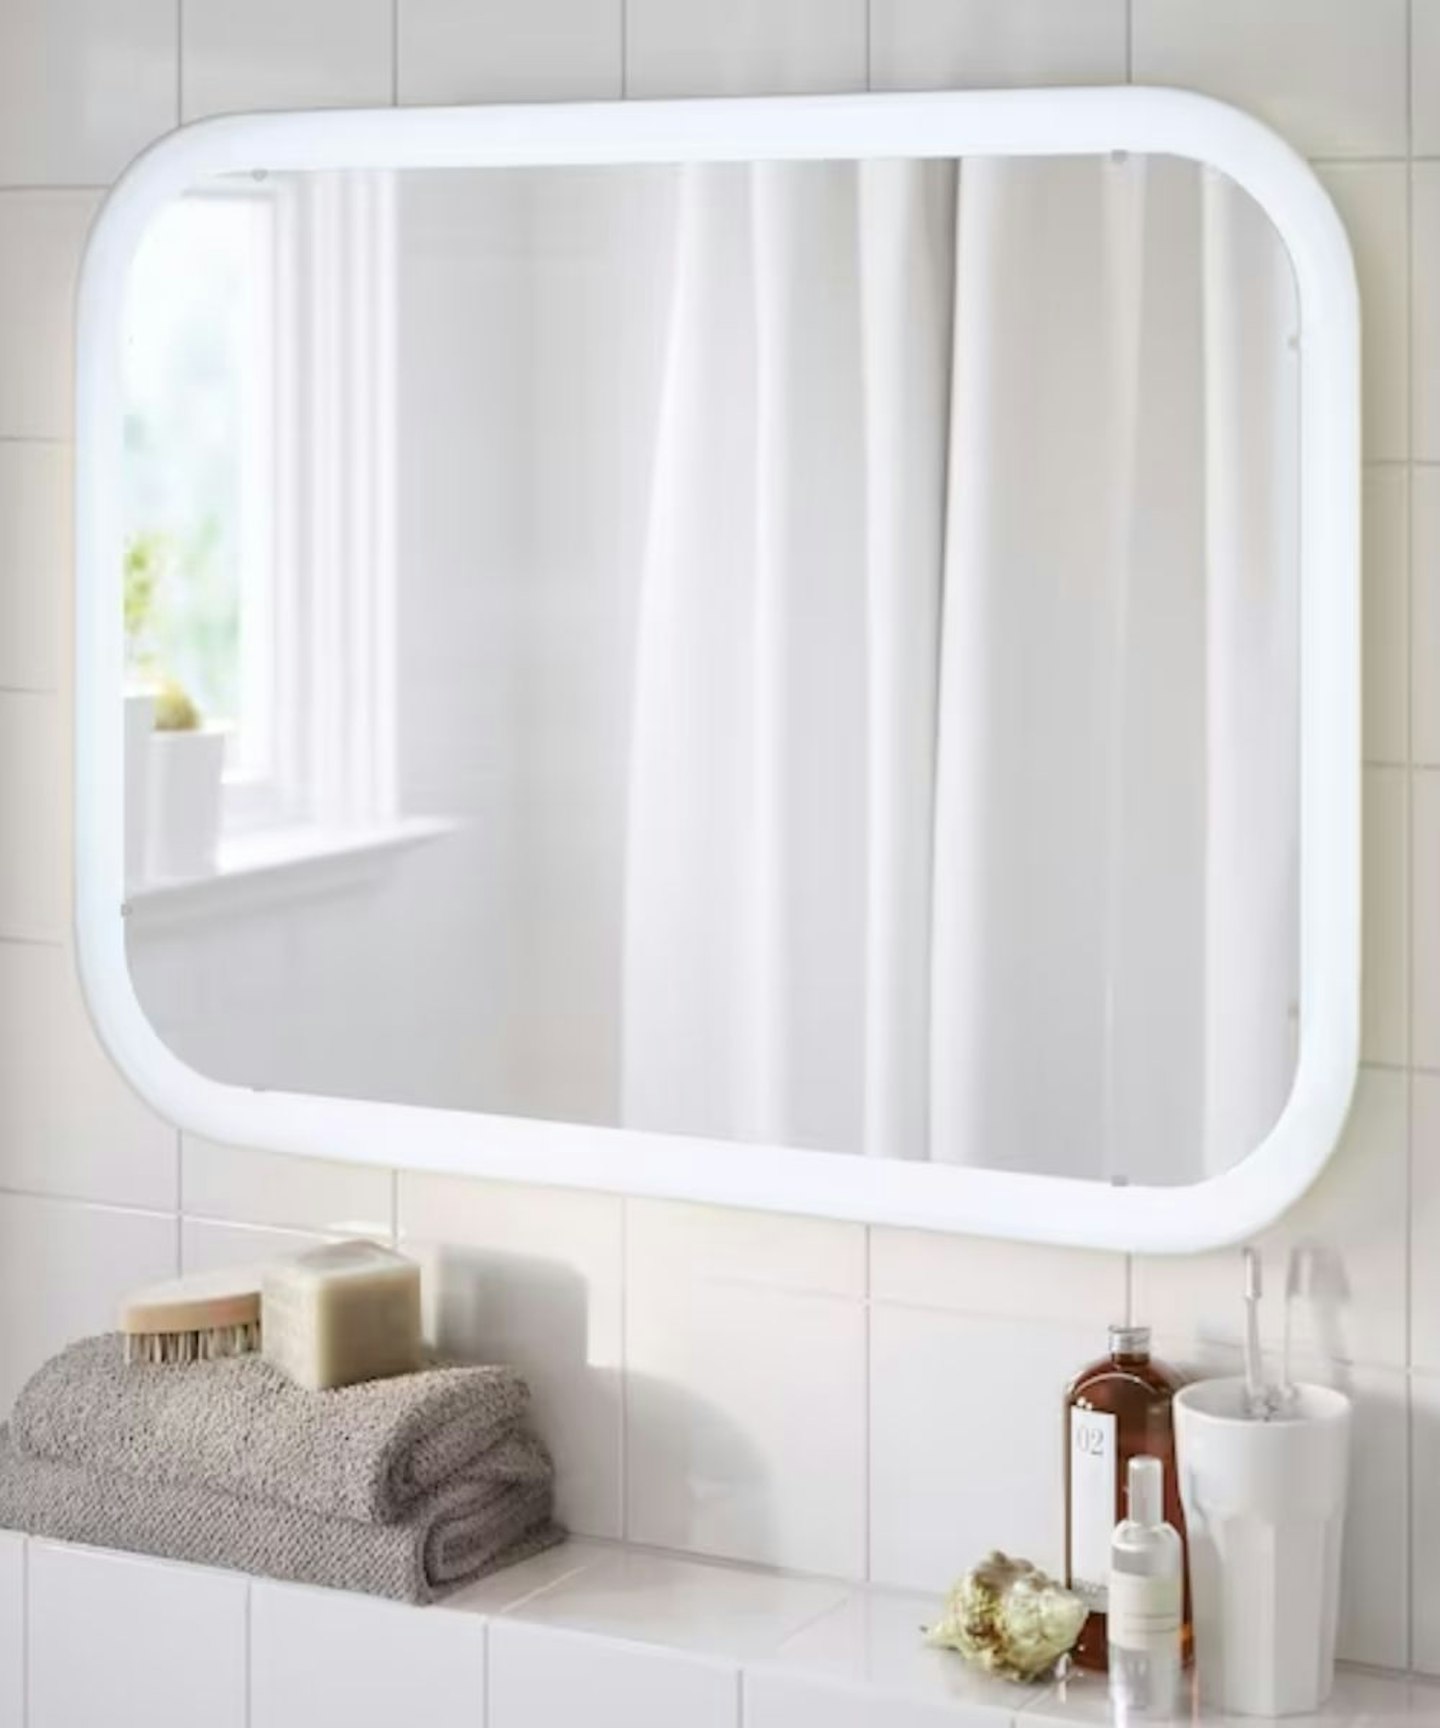 STORJORM Mirror With Integrated Lighting, £115